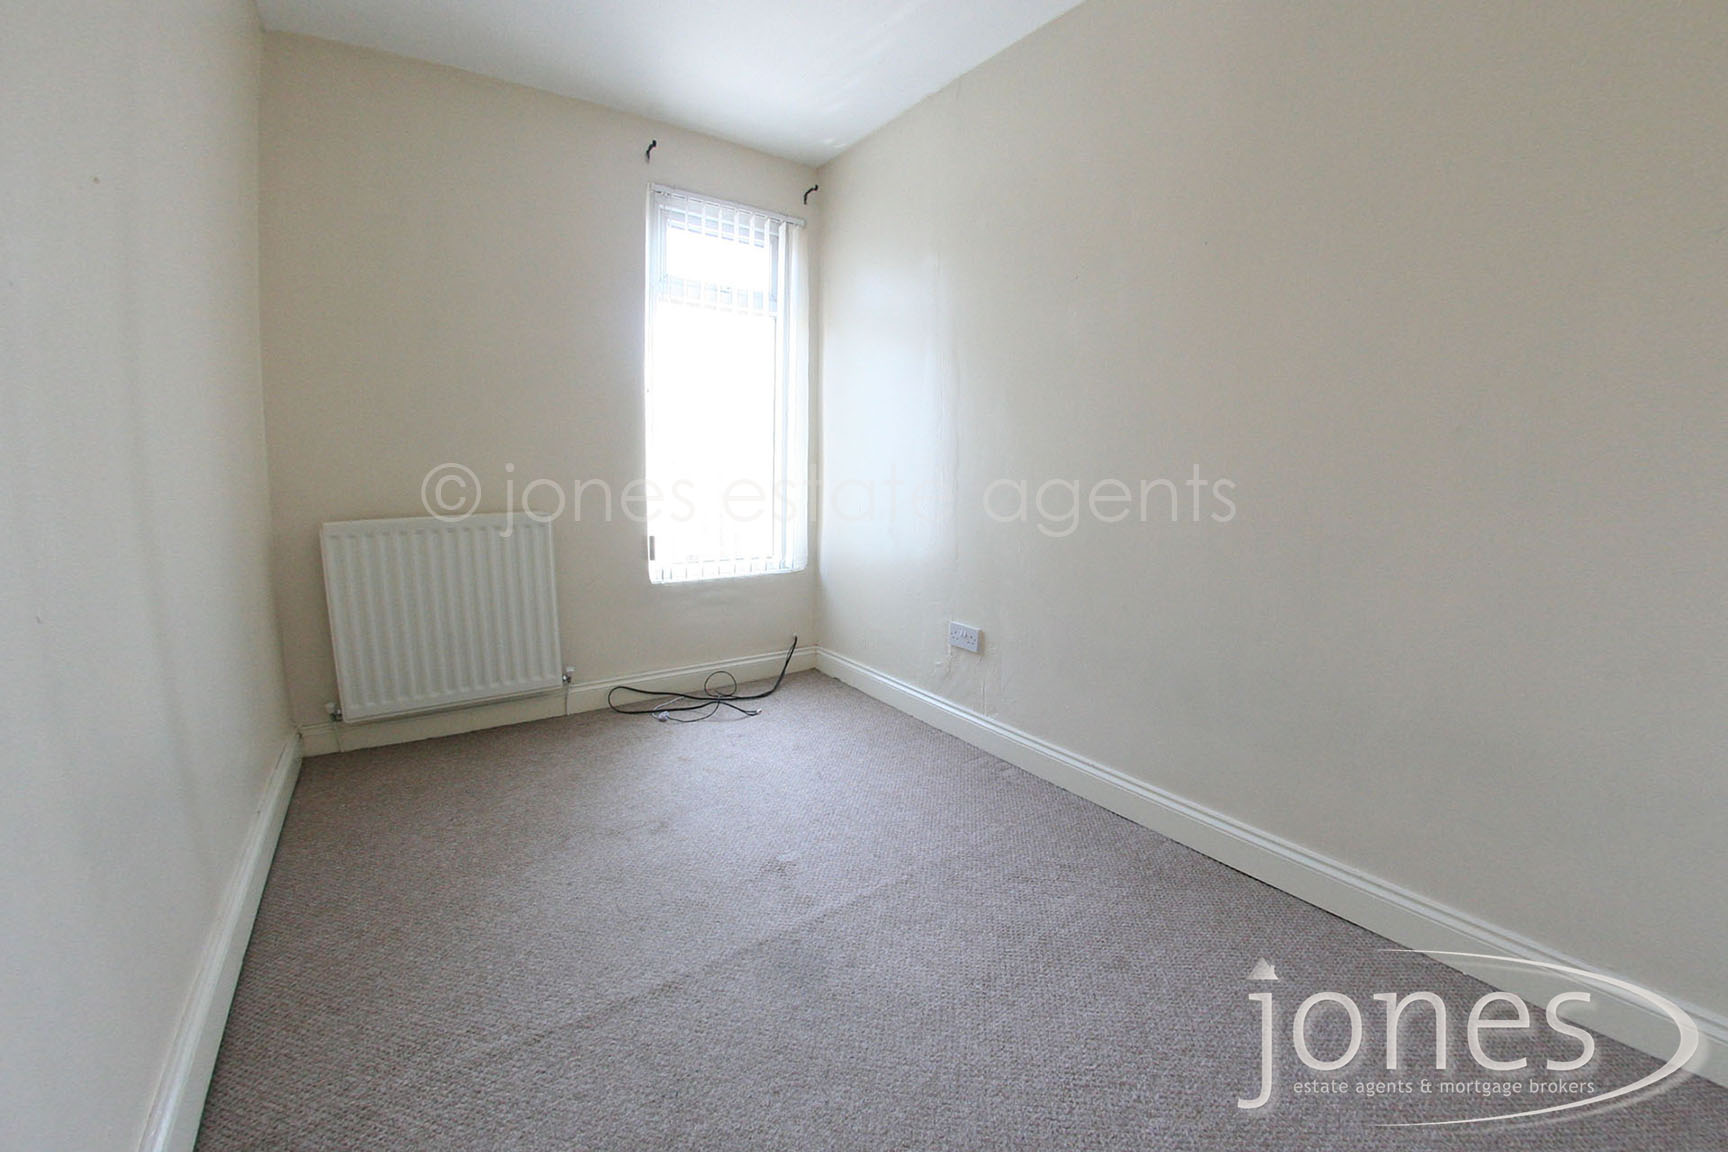 Home for Sale Let - Photo 07 North Road West,Wingate,TS28 5AP